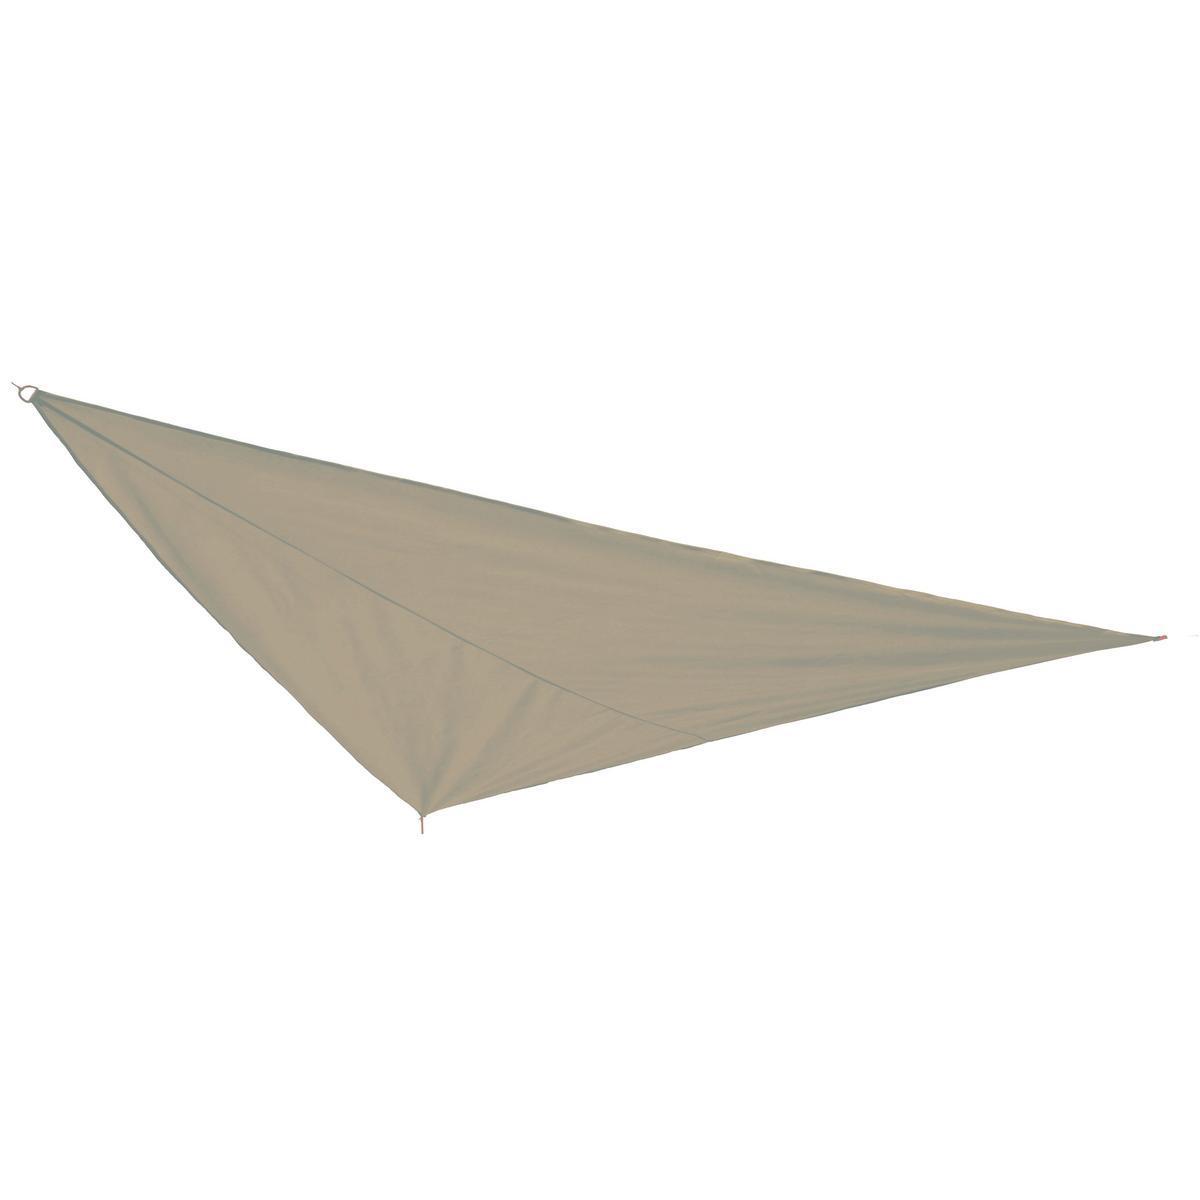 Voile d'ombrage triangulaire - Polyester et Polyamide - 5 x 5 x 5 m - Taupe